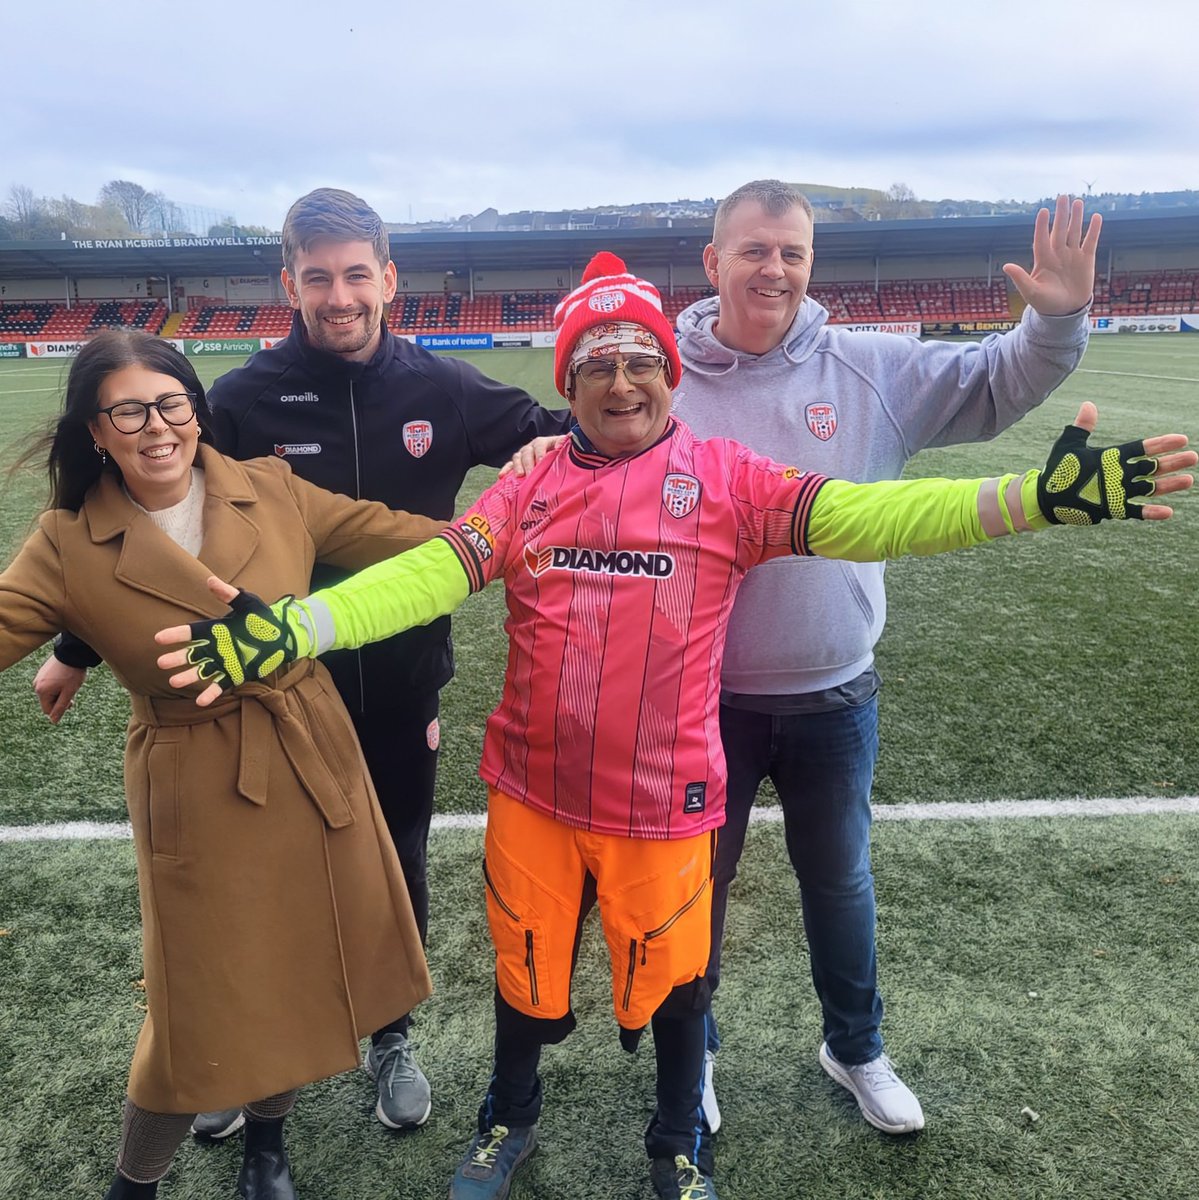 Look who popped in! 🚲🔨 Whilst cycling around the city, Timmy Mallett called into the Brandywell for some pics and to check out the merch!